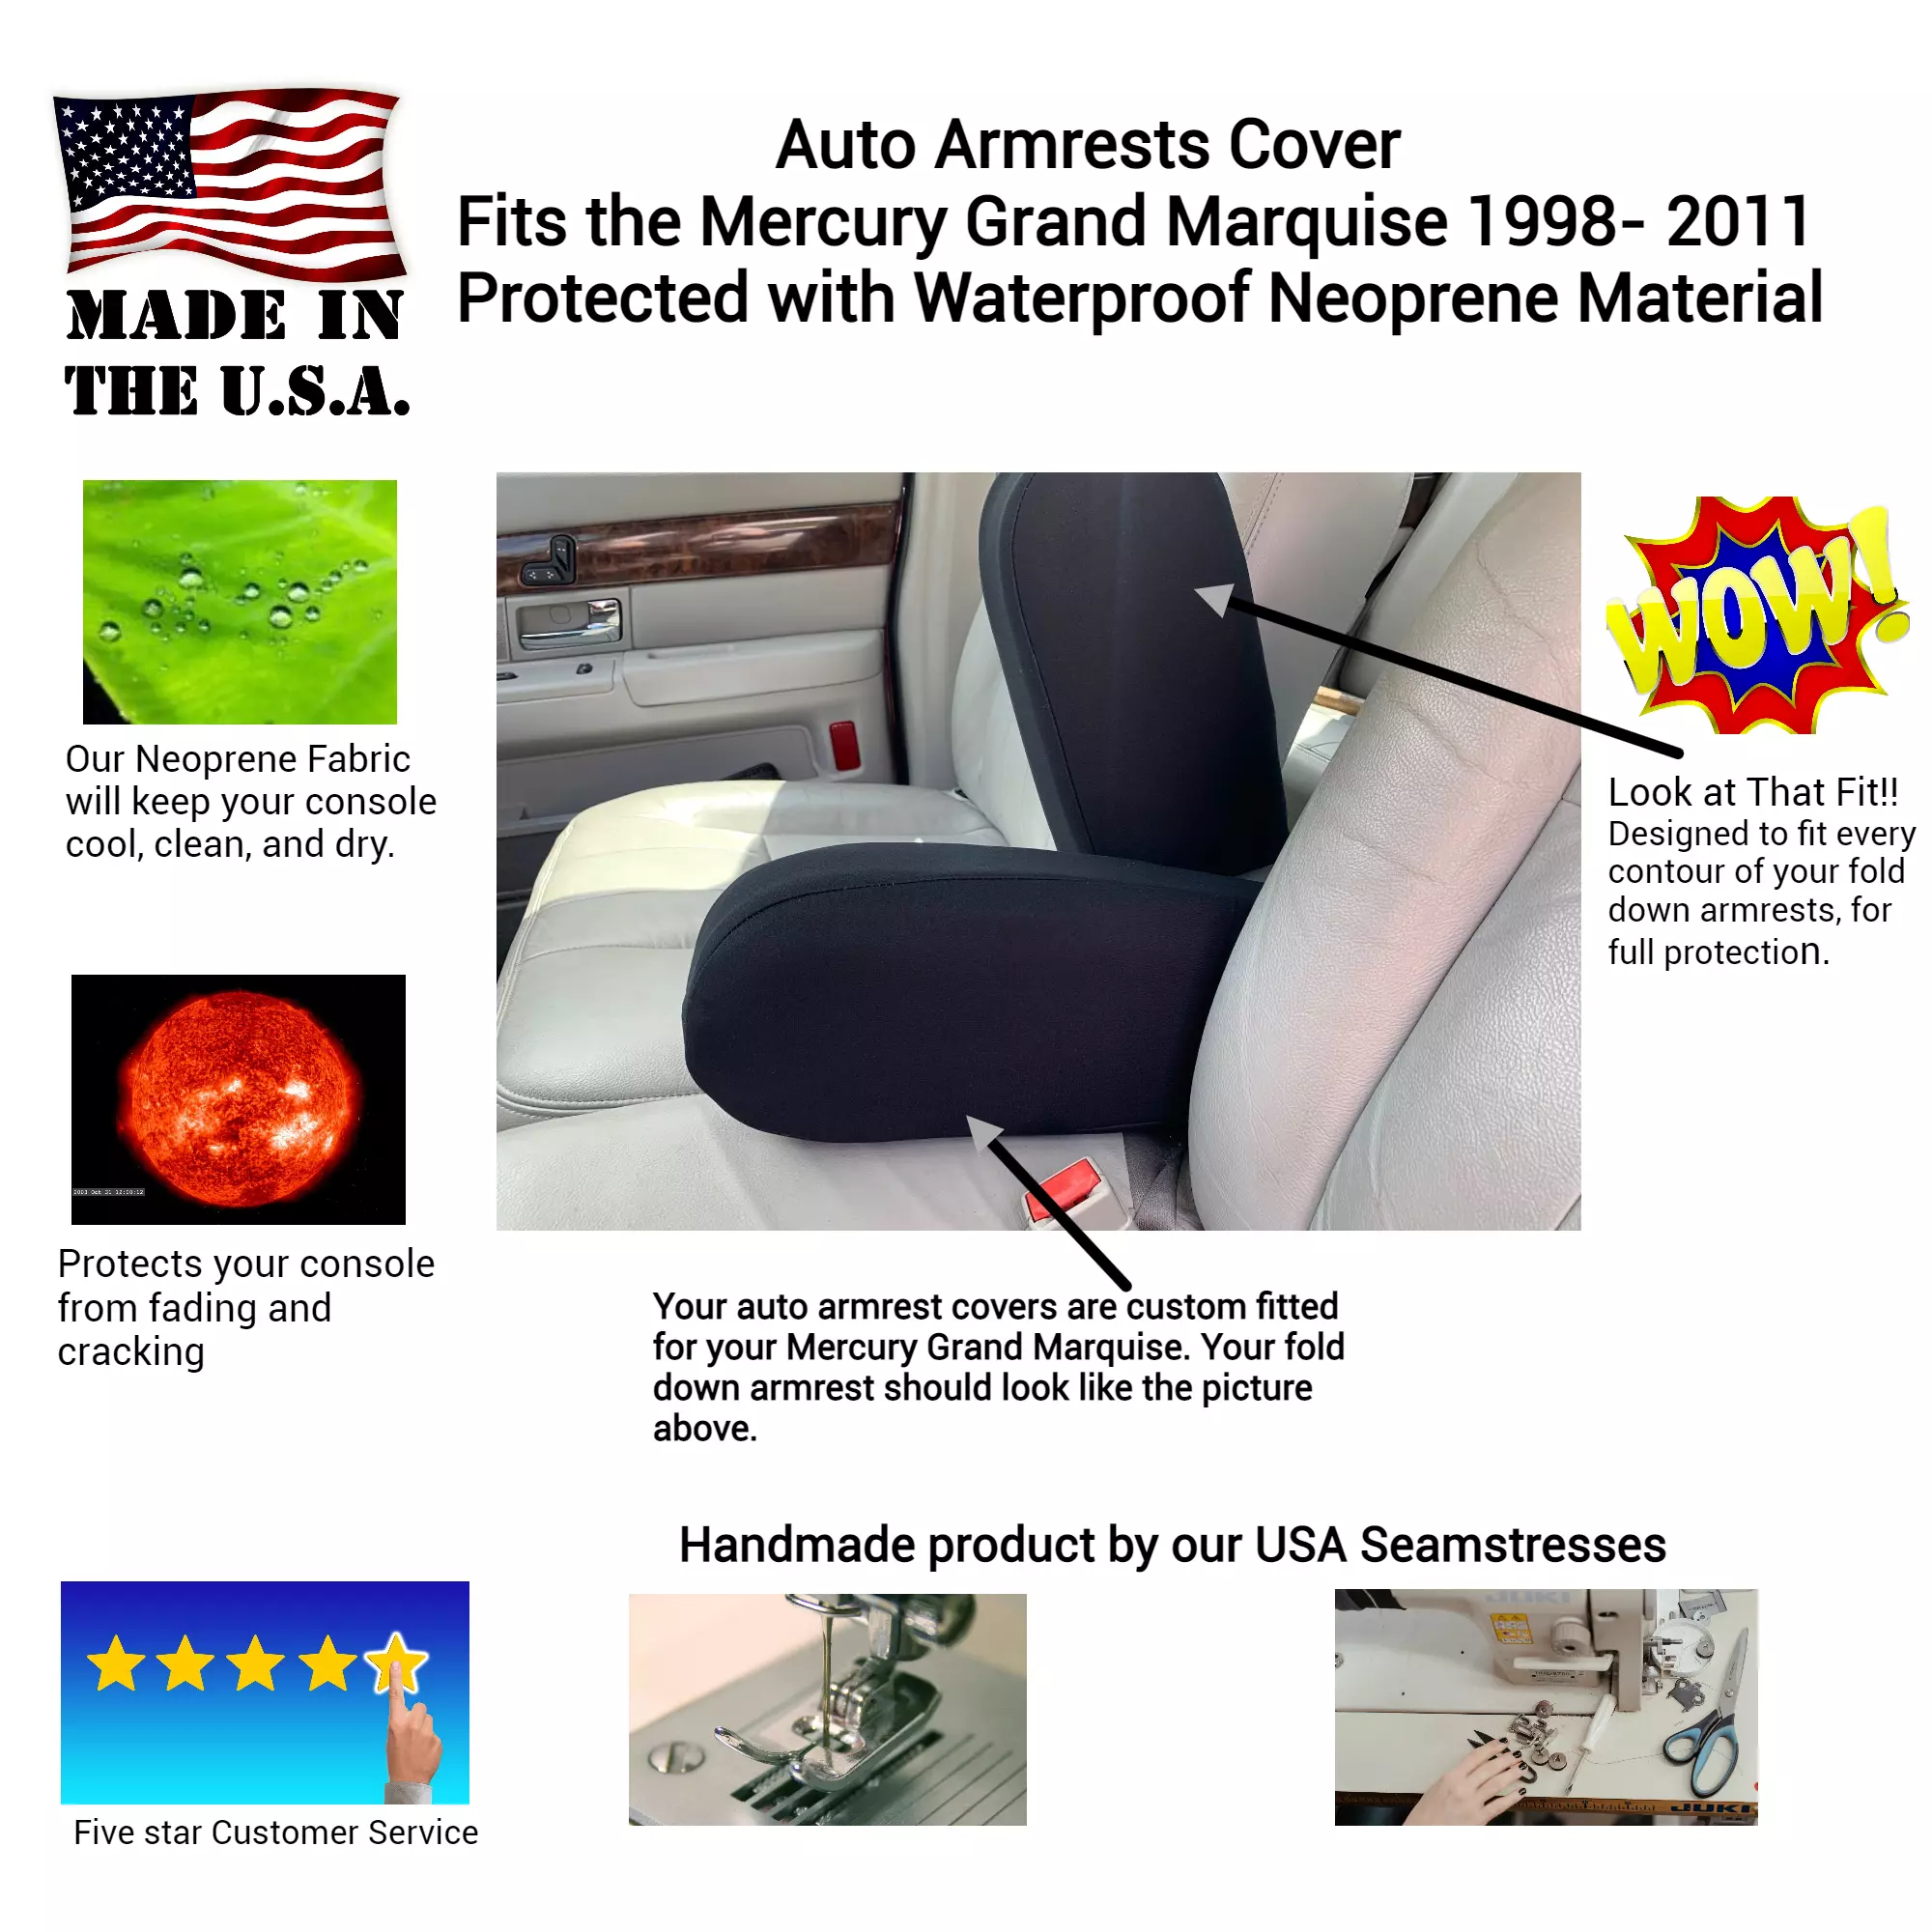 Buy Auto Armrest Covers -Fits the Mercury Grand Marquise 1995-2011 Neoprene Material (1 pair)